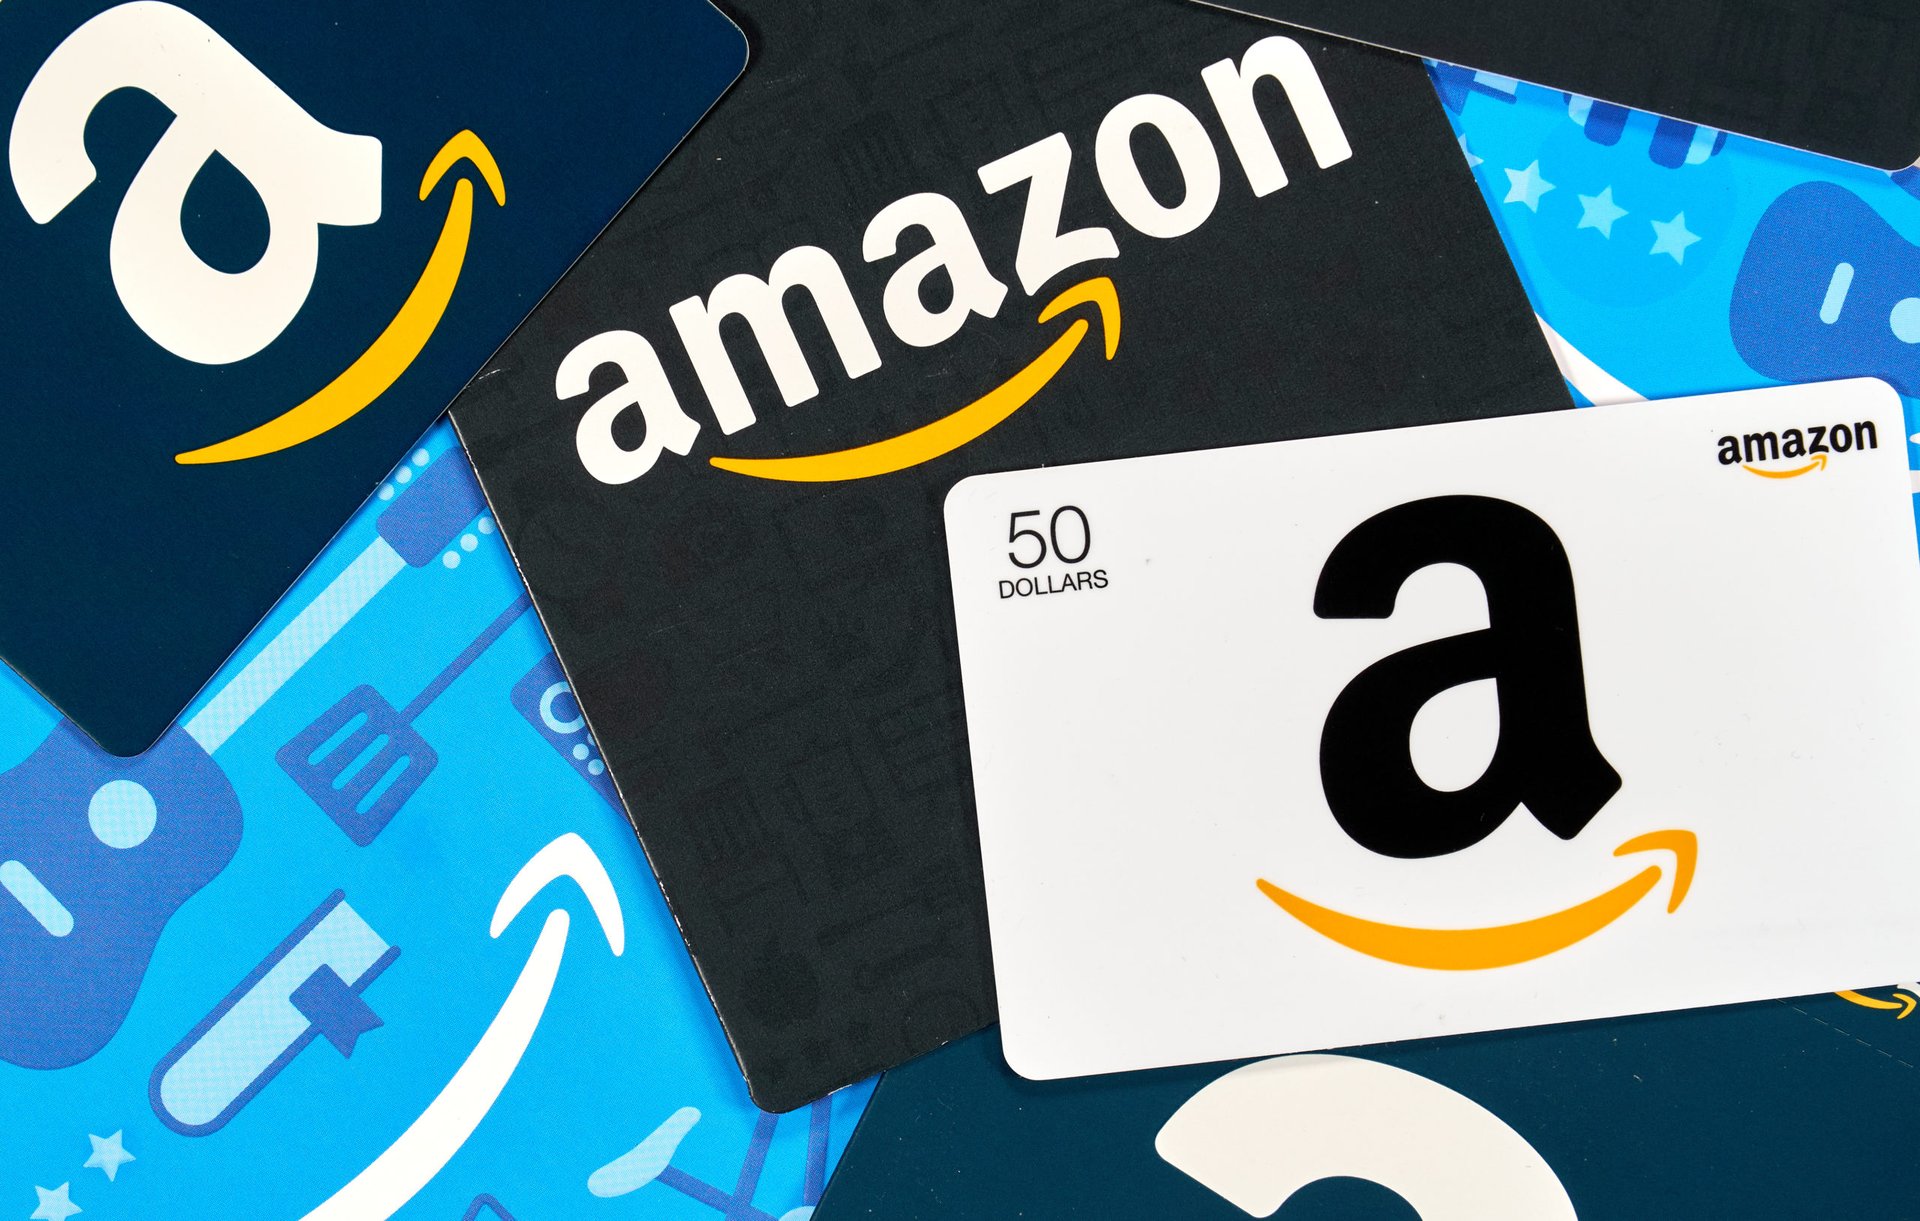 Amazon Offers 15 Free Credit With Gift Card Purchase